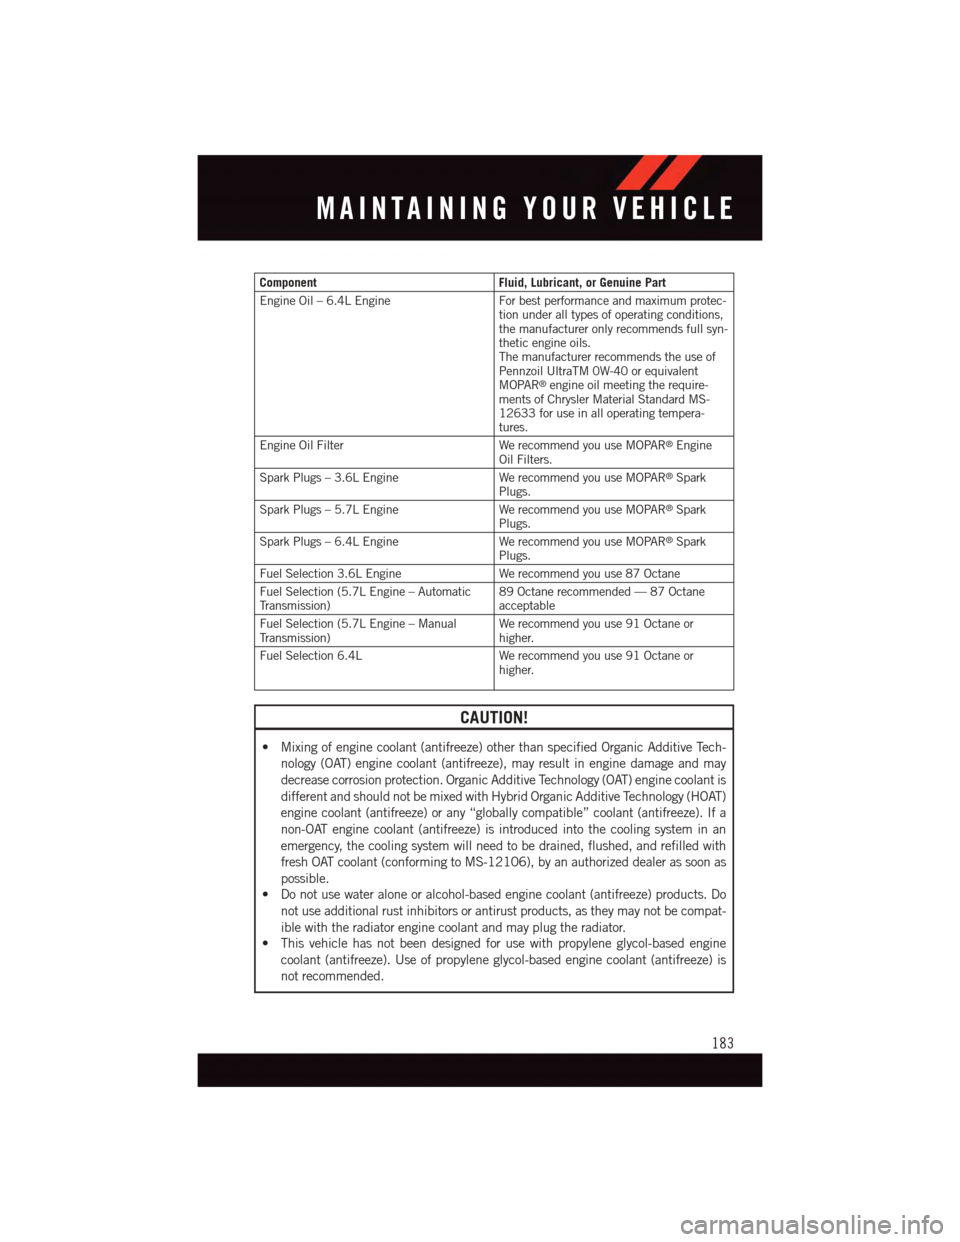 DODGE CHALLENGER 2015 3.G User Guide ComponentFluid, Lubricant, or Genuine Part
Engine Oil – 6.4L EngineFor best performance and maximum protec-tion under all types of operating conditions,the manufacturer only recommends full syn-thet